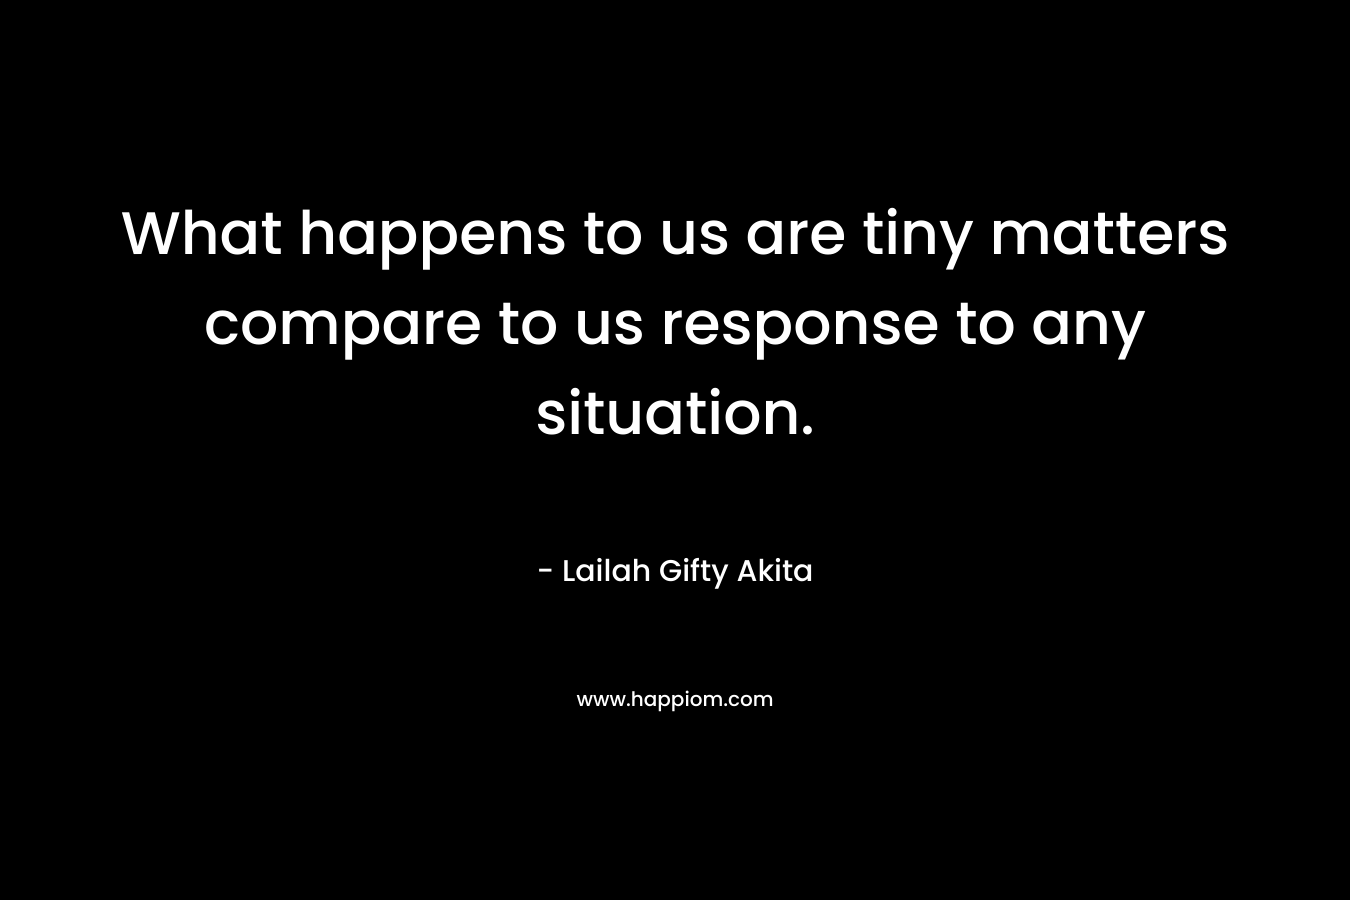 What happens to us are tiny matters compare to us response to any situation.